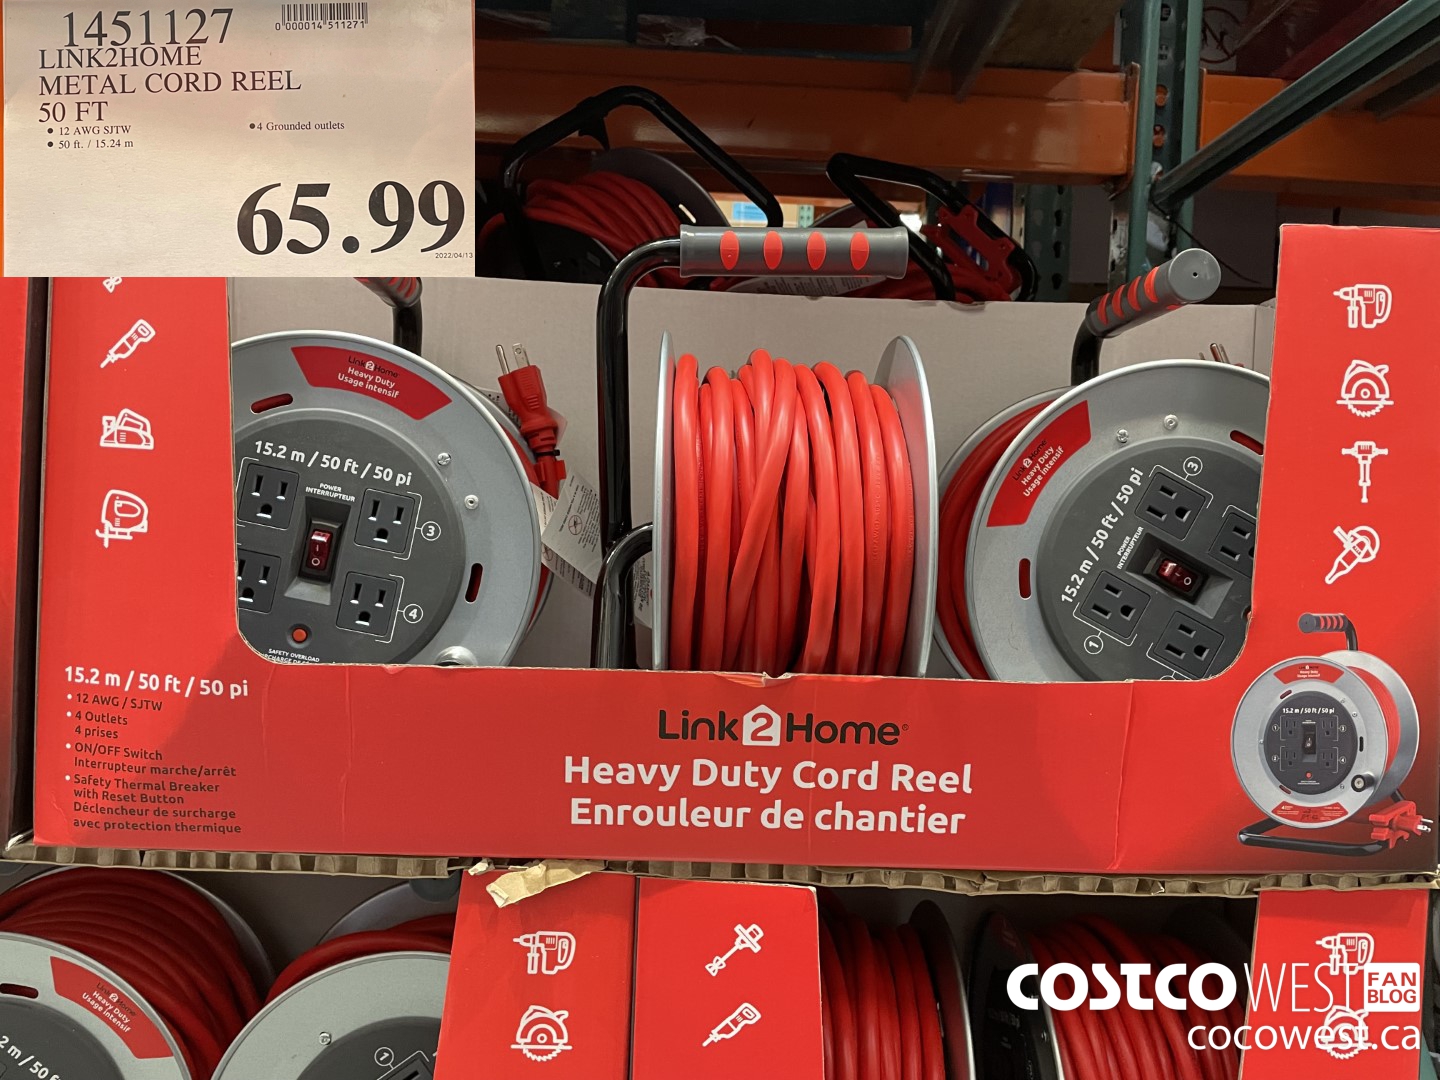 Weekend Update! – Costco Sale Items for Apr 15-17, 2022 for BC, AB, MB, SK  - Costco West Fan Blog